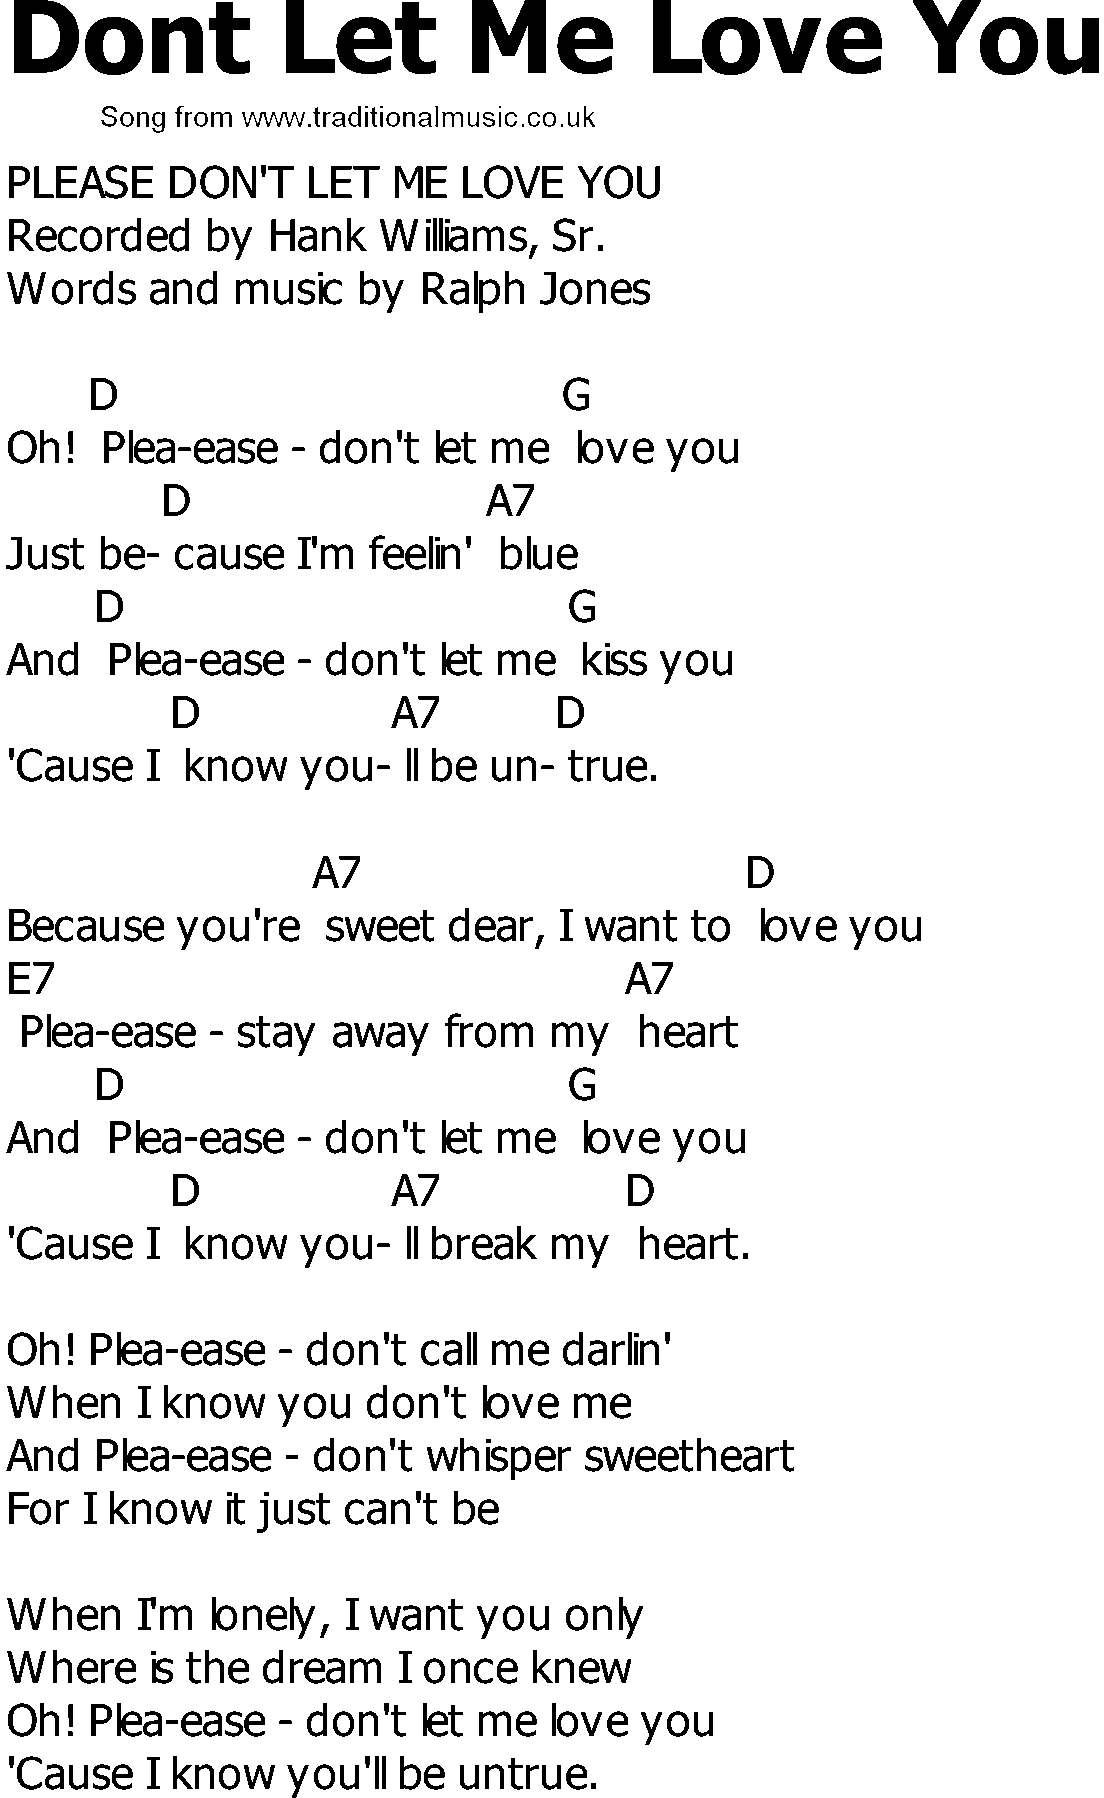 Old Country song lyrics with chords - Dont Let Me Love You